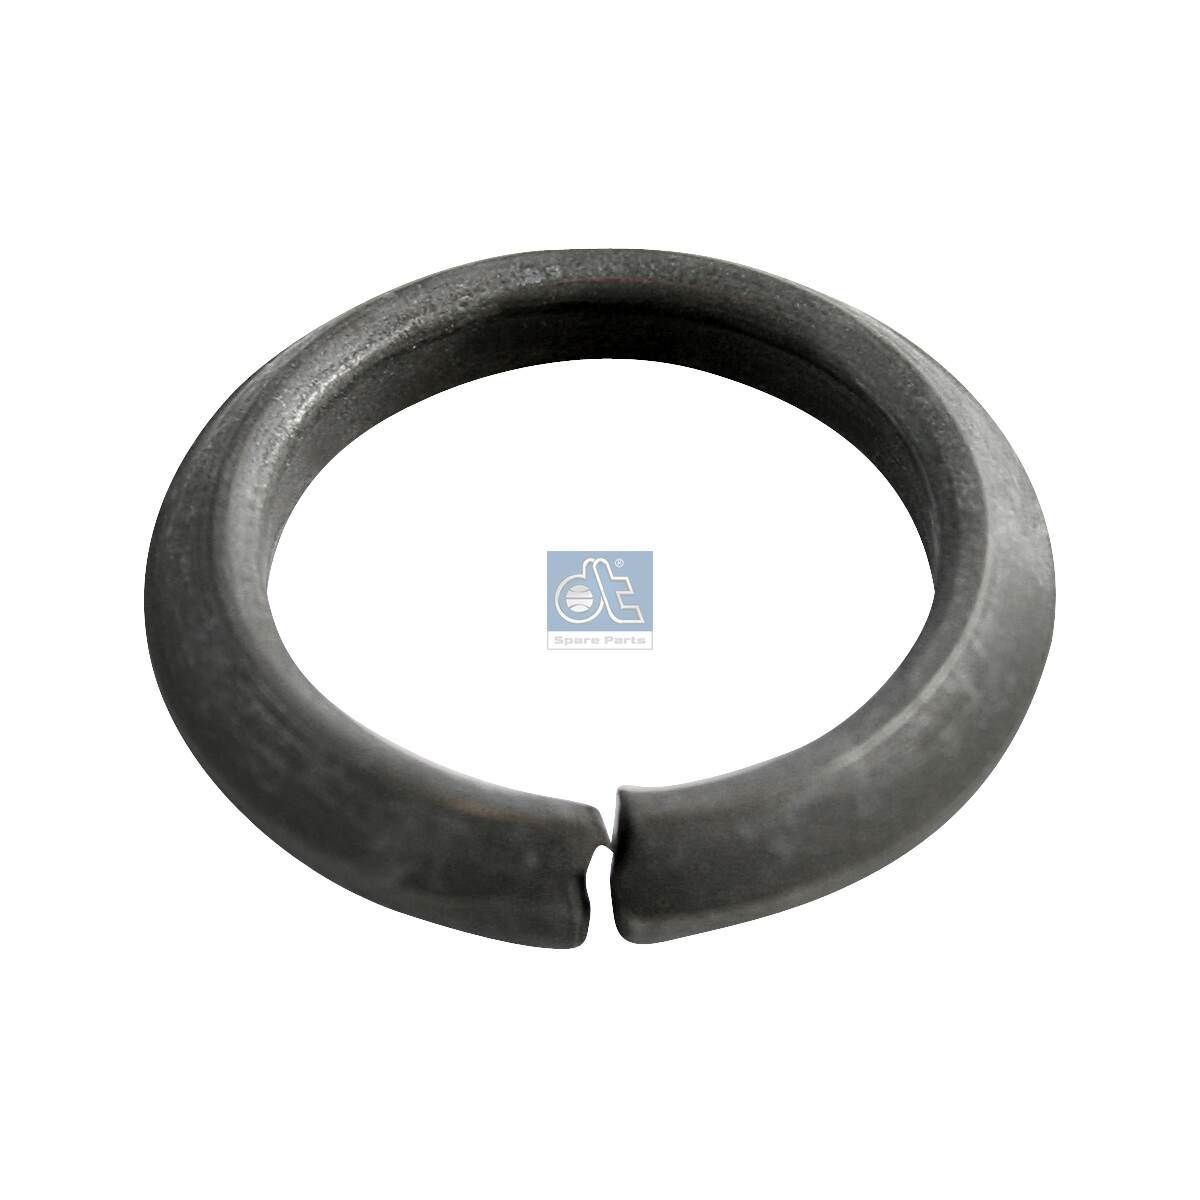 DT Spare Parts 4.50298 Centering Ring, rim A324 997 00 26